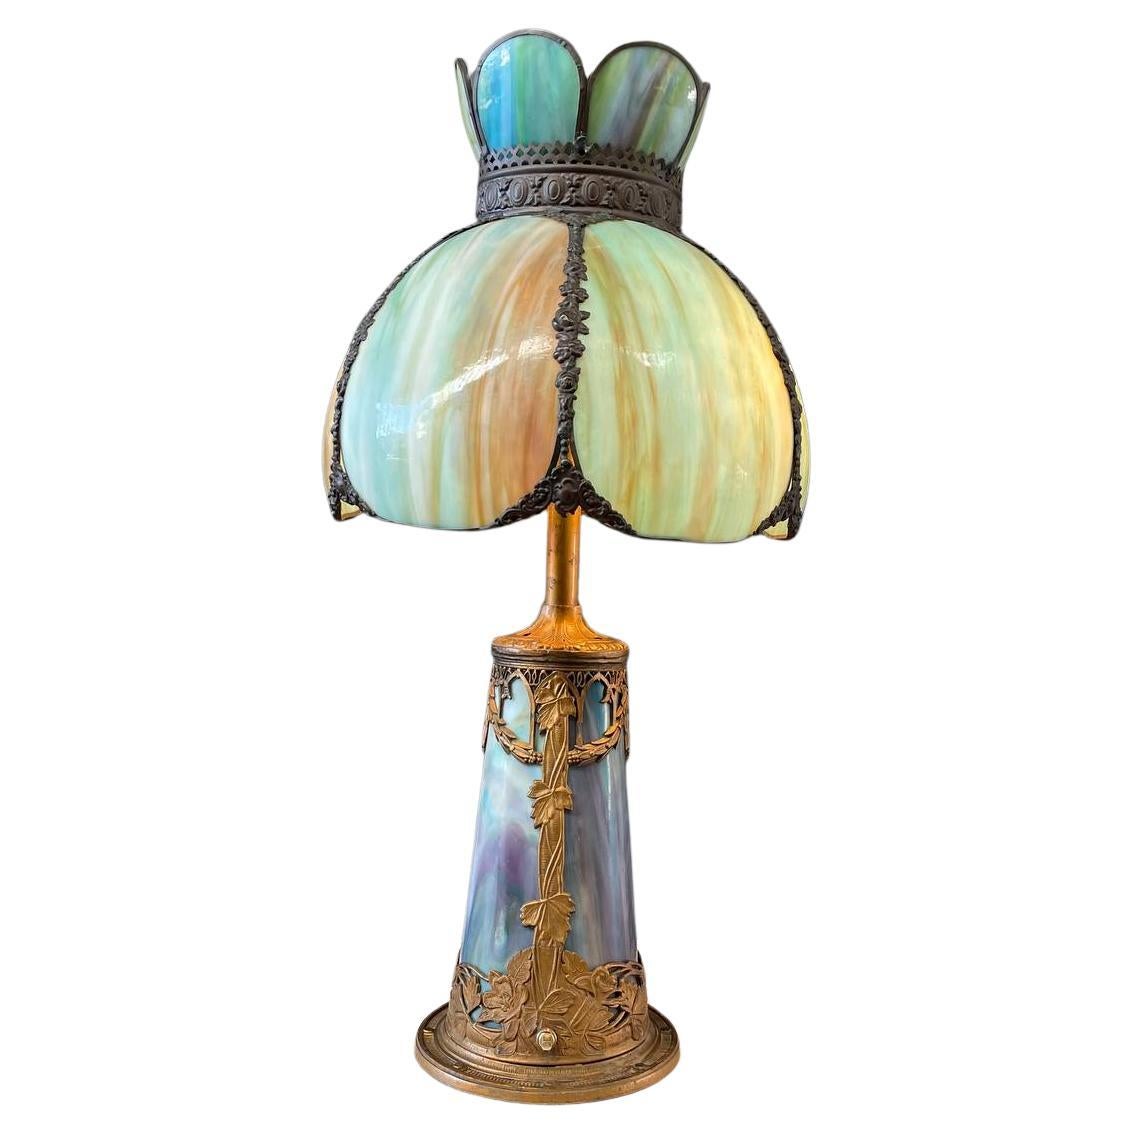 Vintage Art Deco Style Table Lamp with Tiffany Style Shade